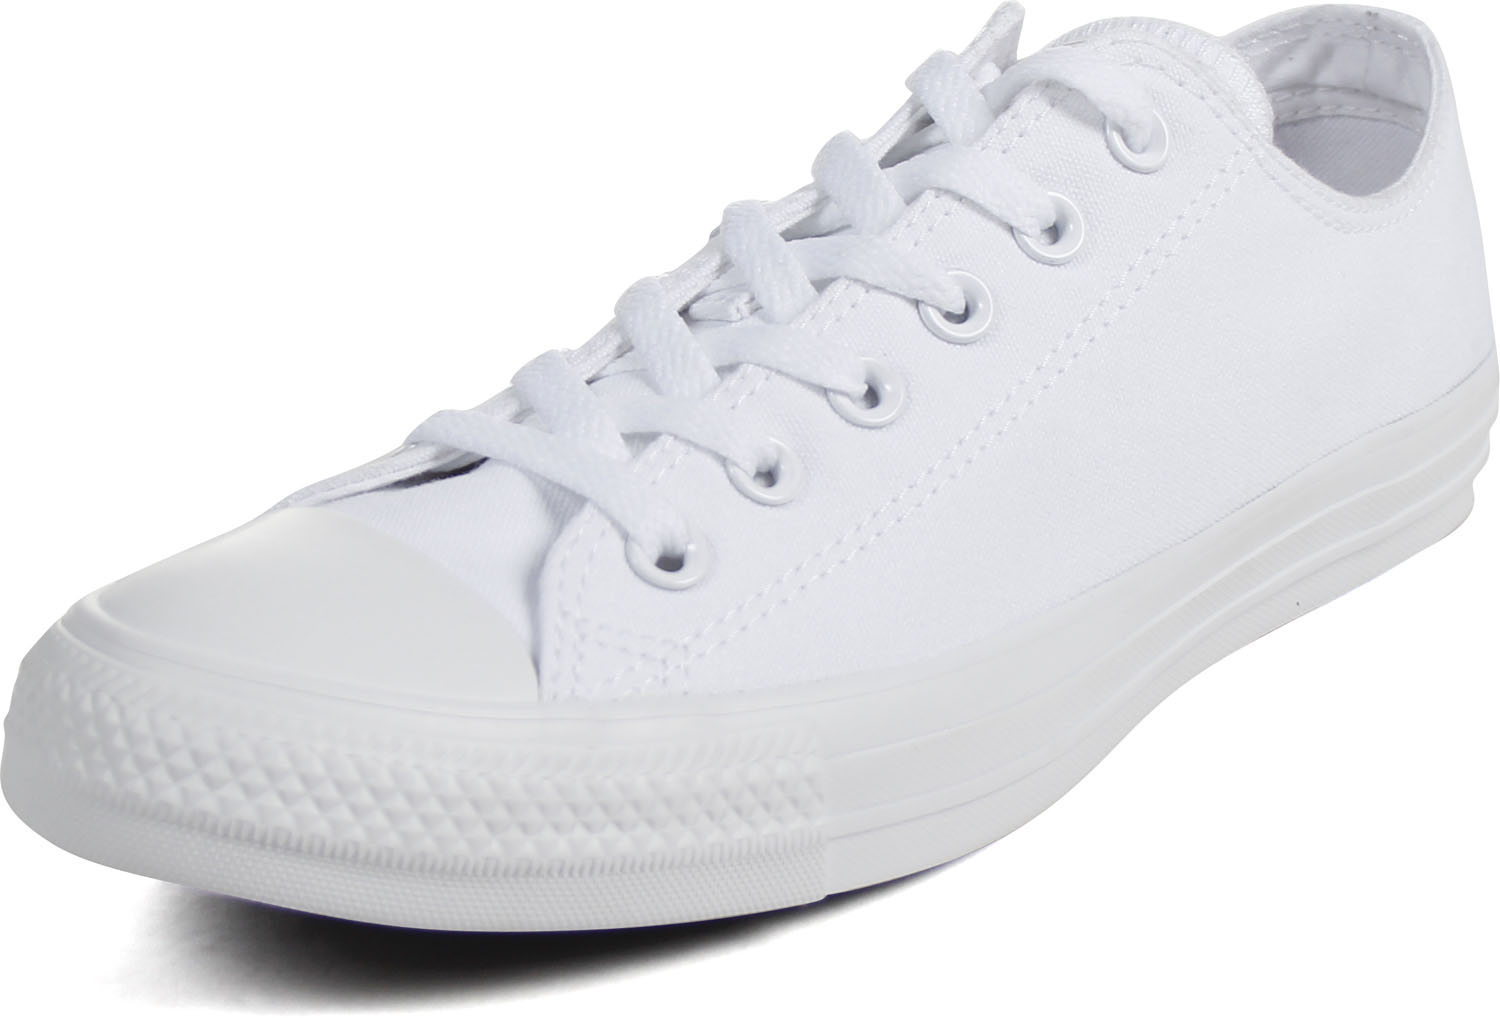 Converse - Unisex Chuck Taylor All Star Seasonal Low Top Shoes